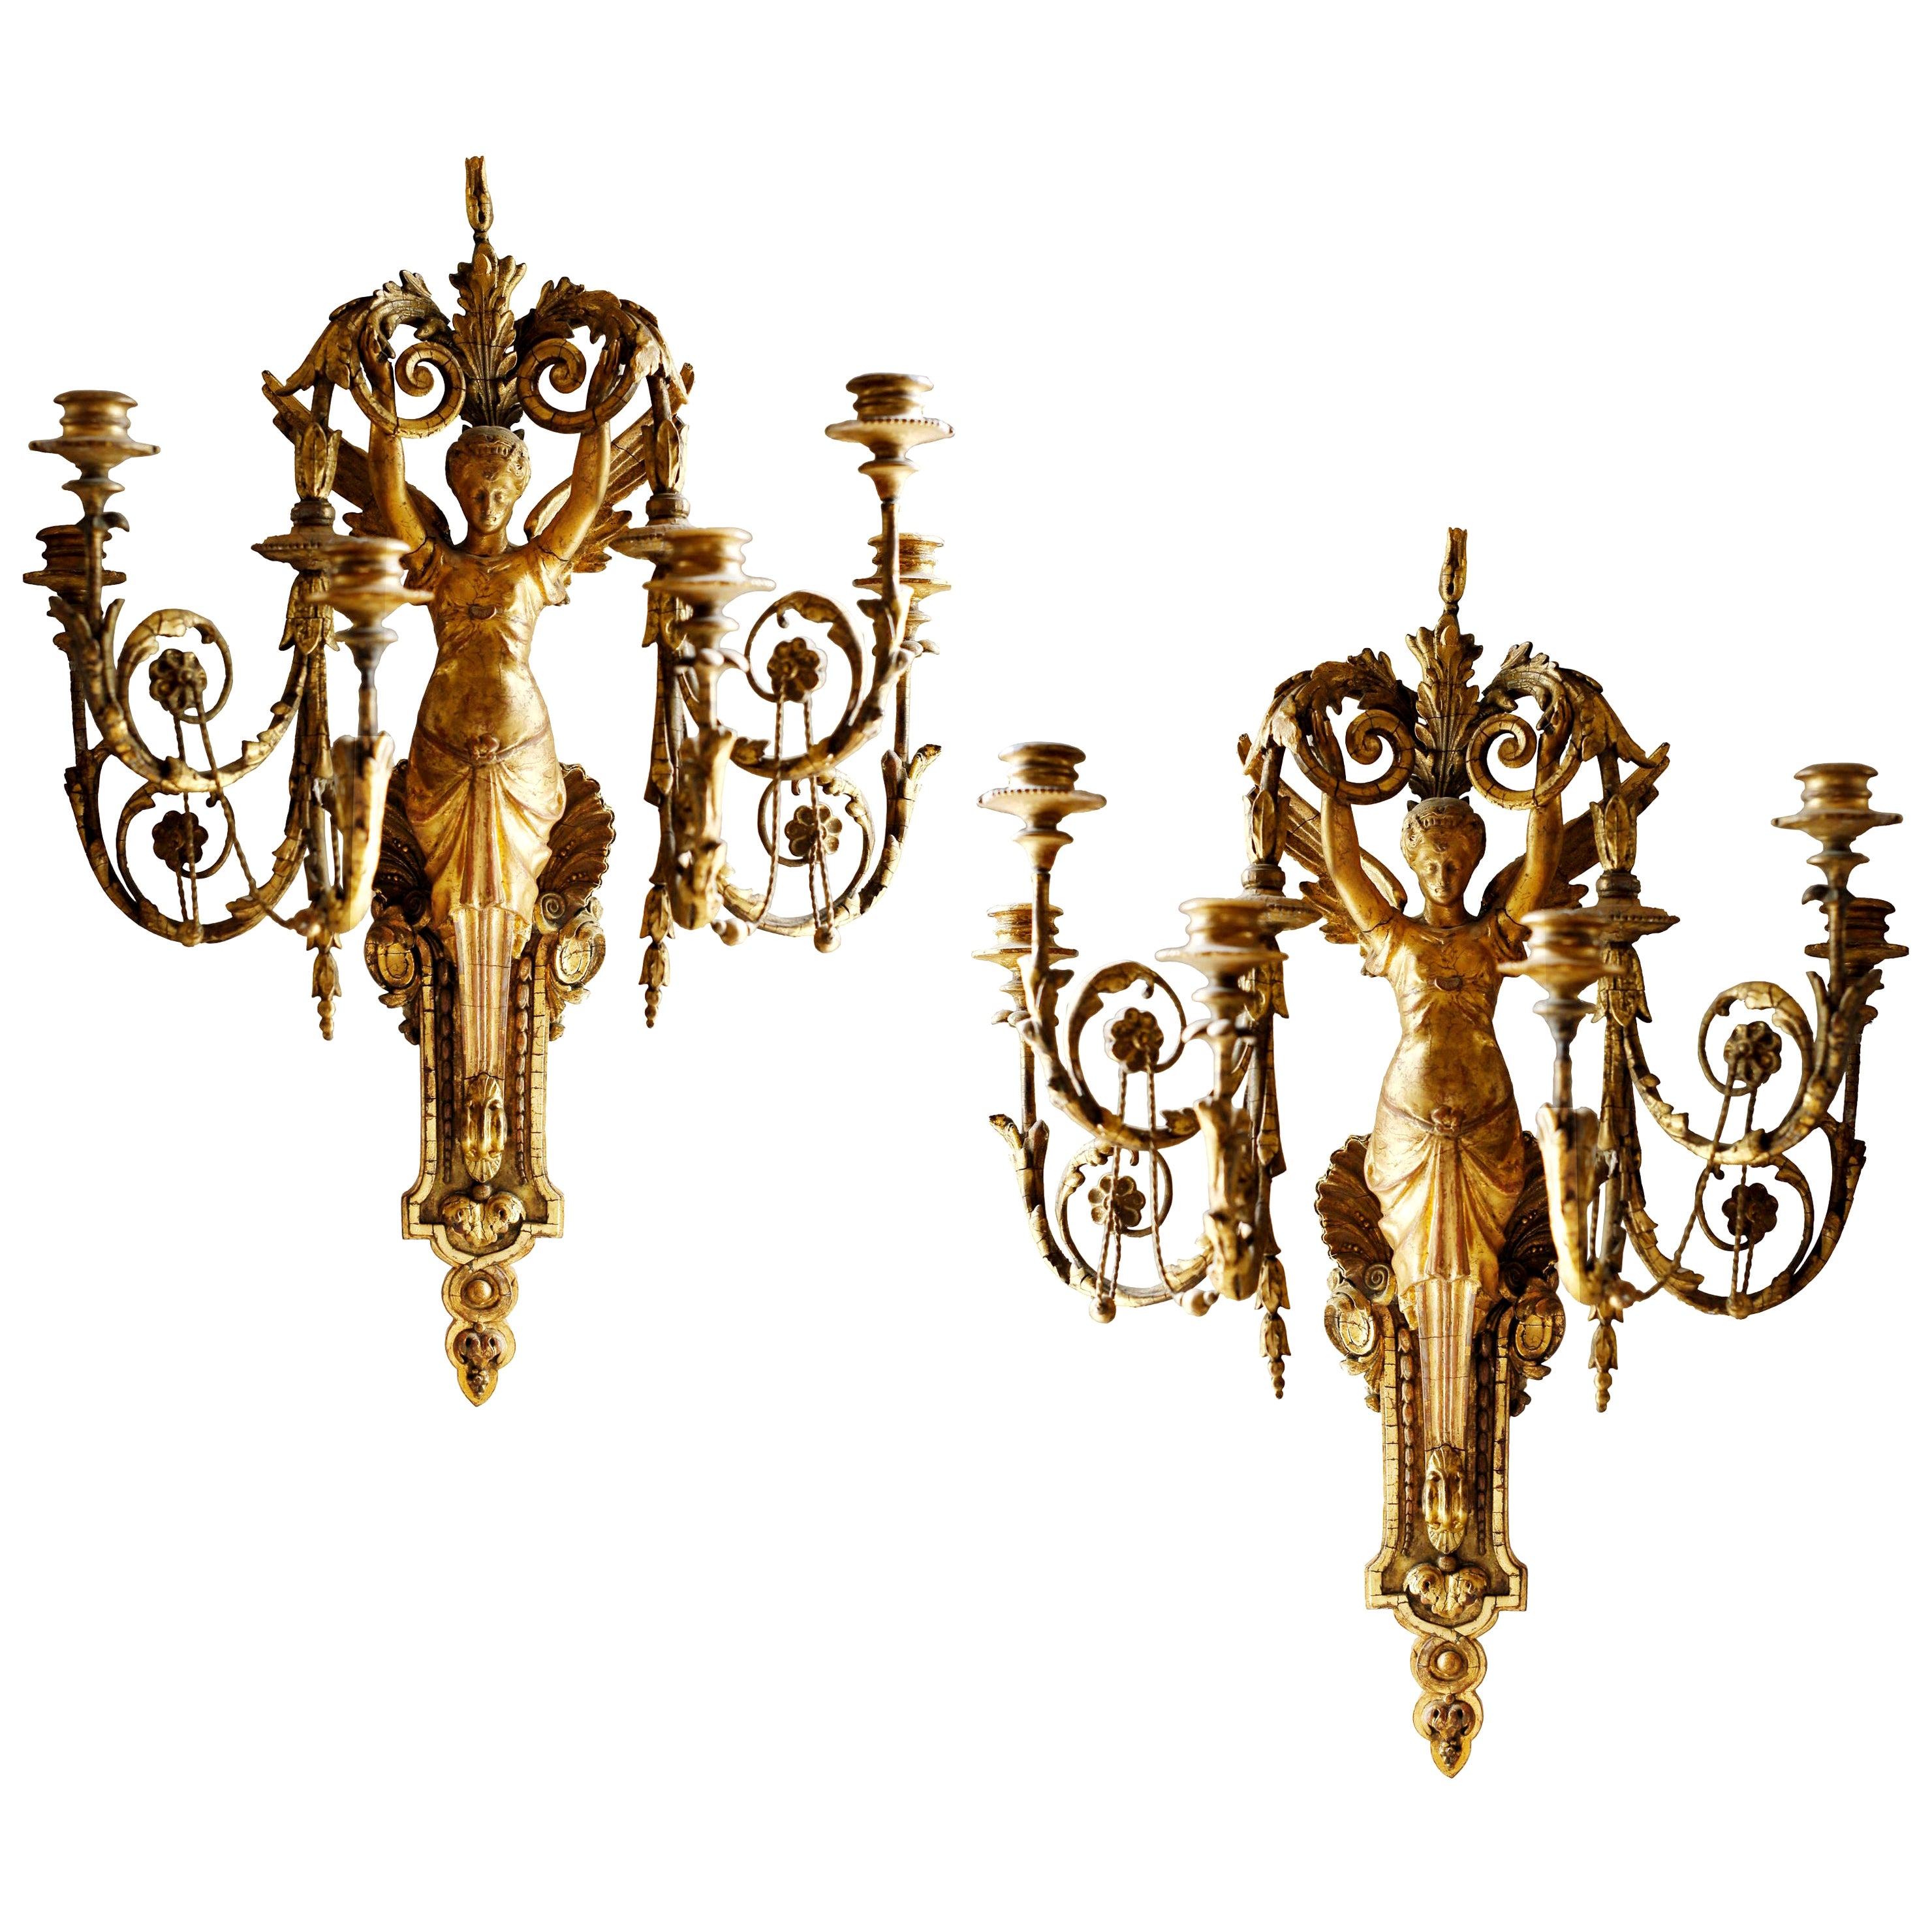 Pair of Early 19th Century Italian Neoclassical Gilt Figural 6-Light Sconces For Sale